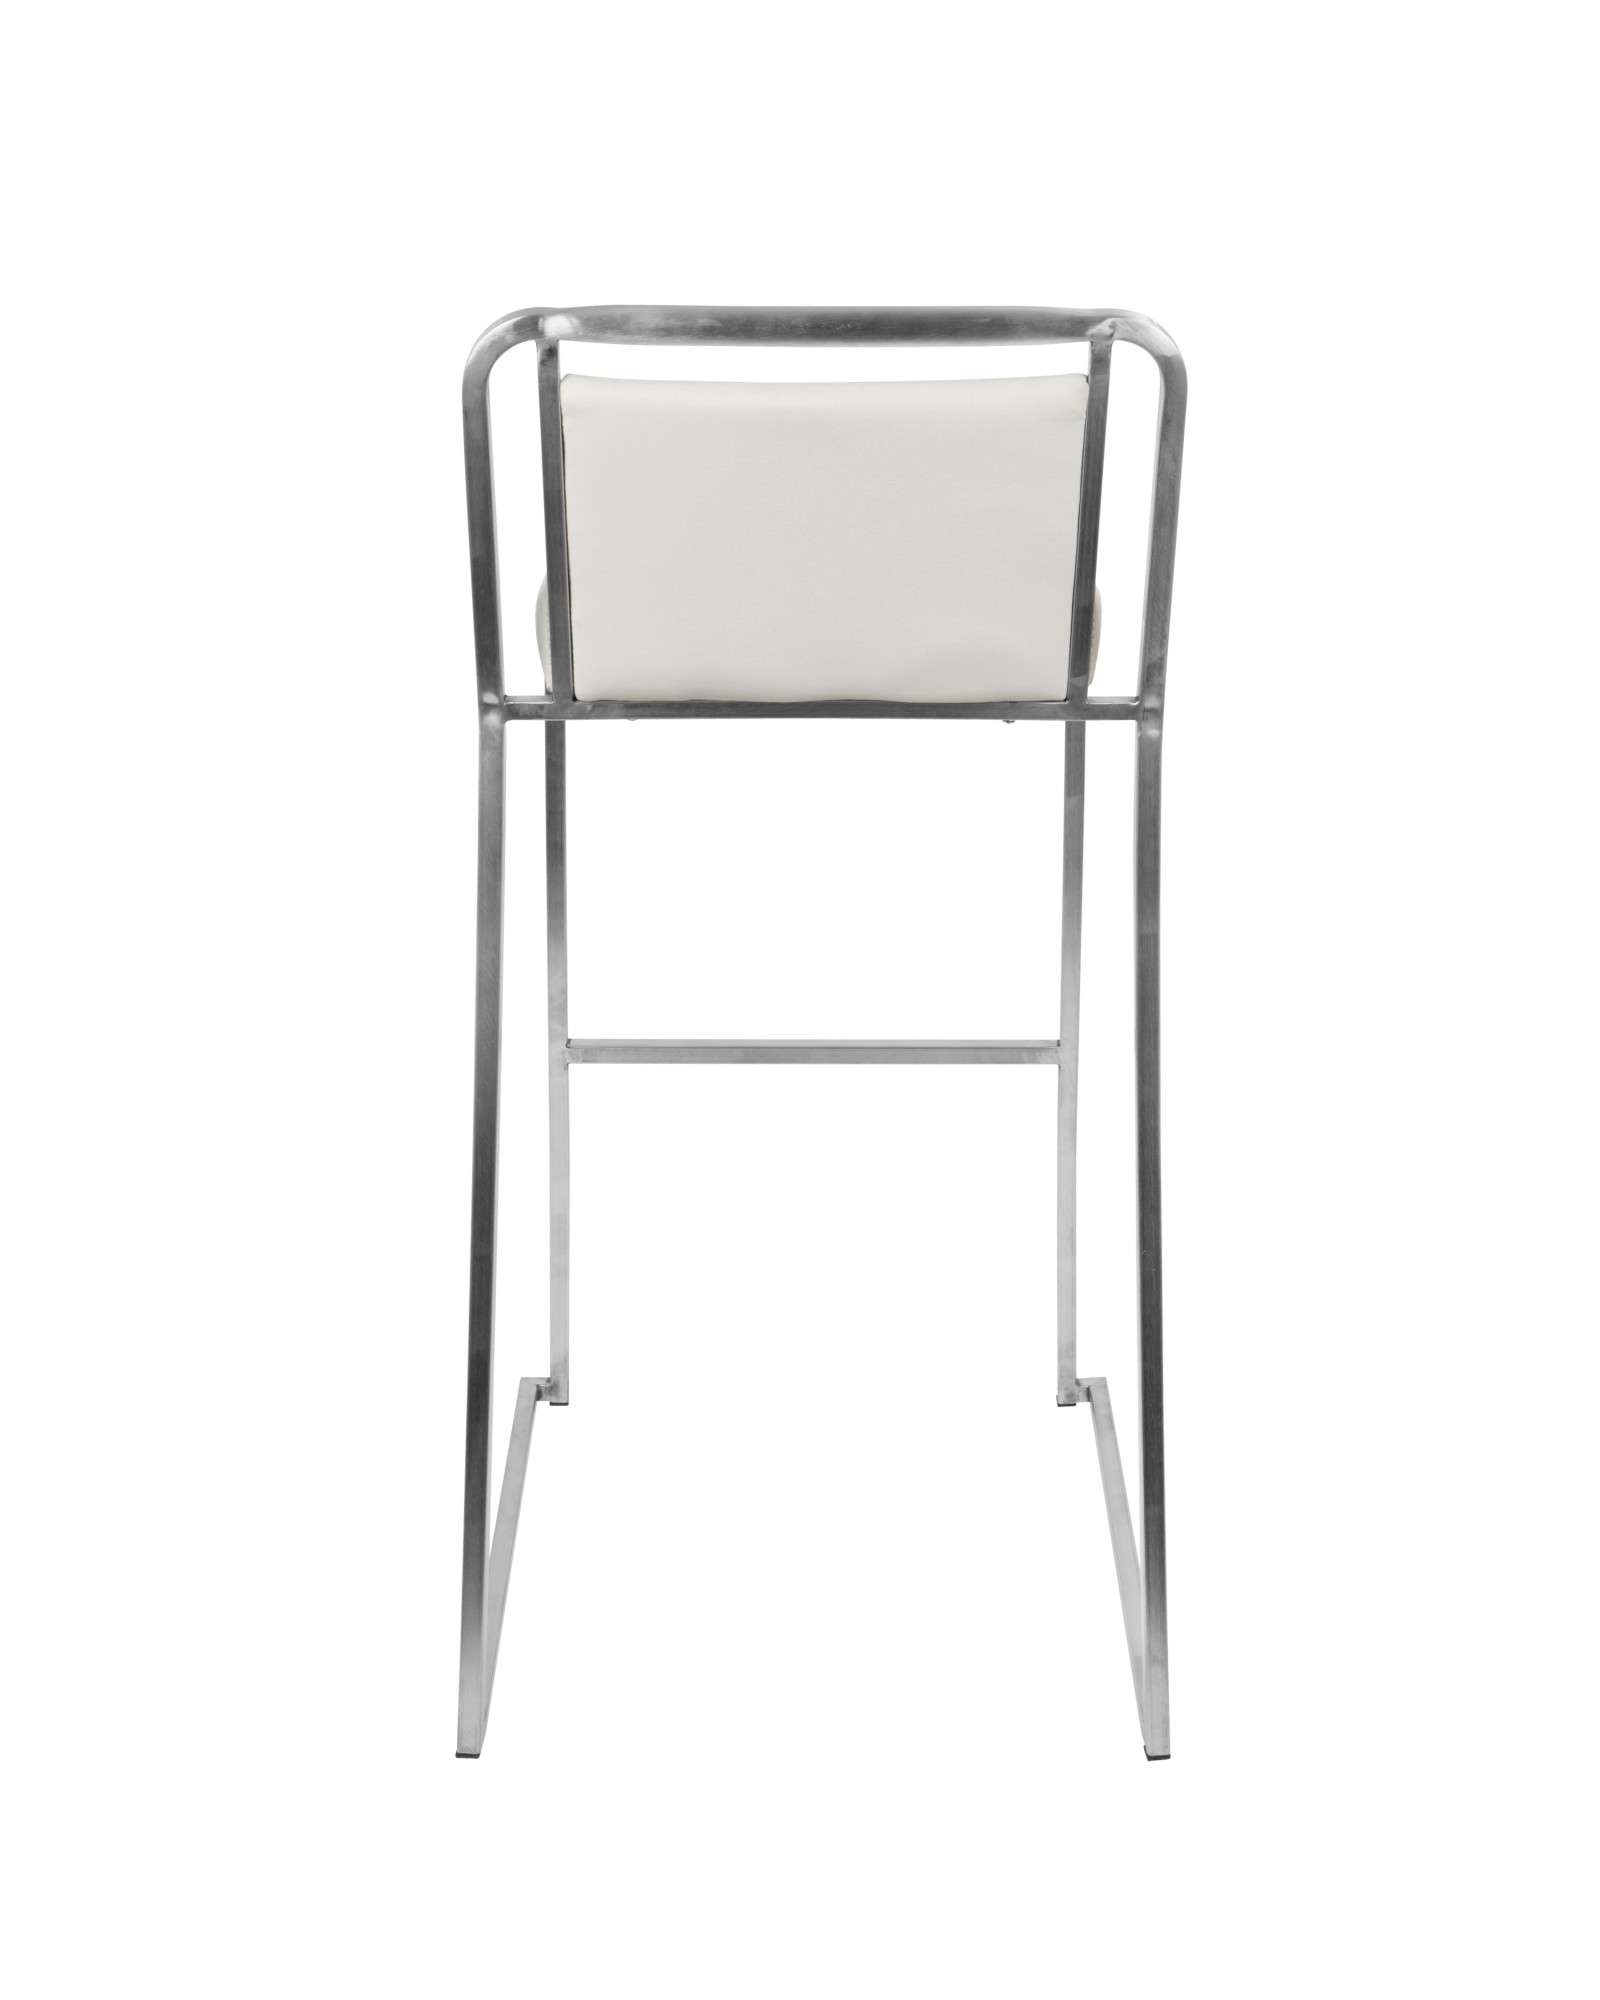 Cascade Contemporary Stackable Barstool in White Faux Leather - Set of 2